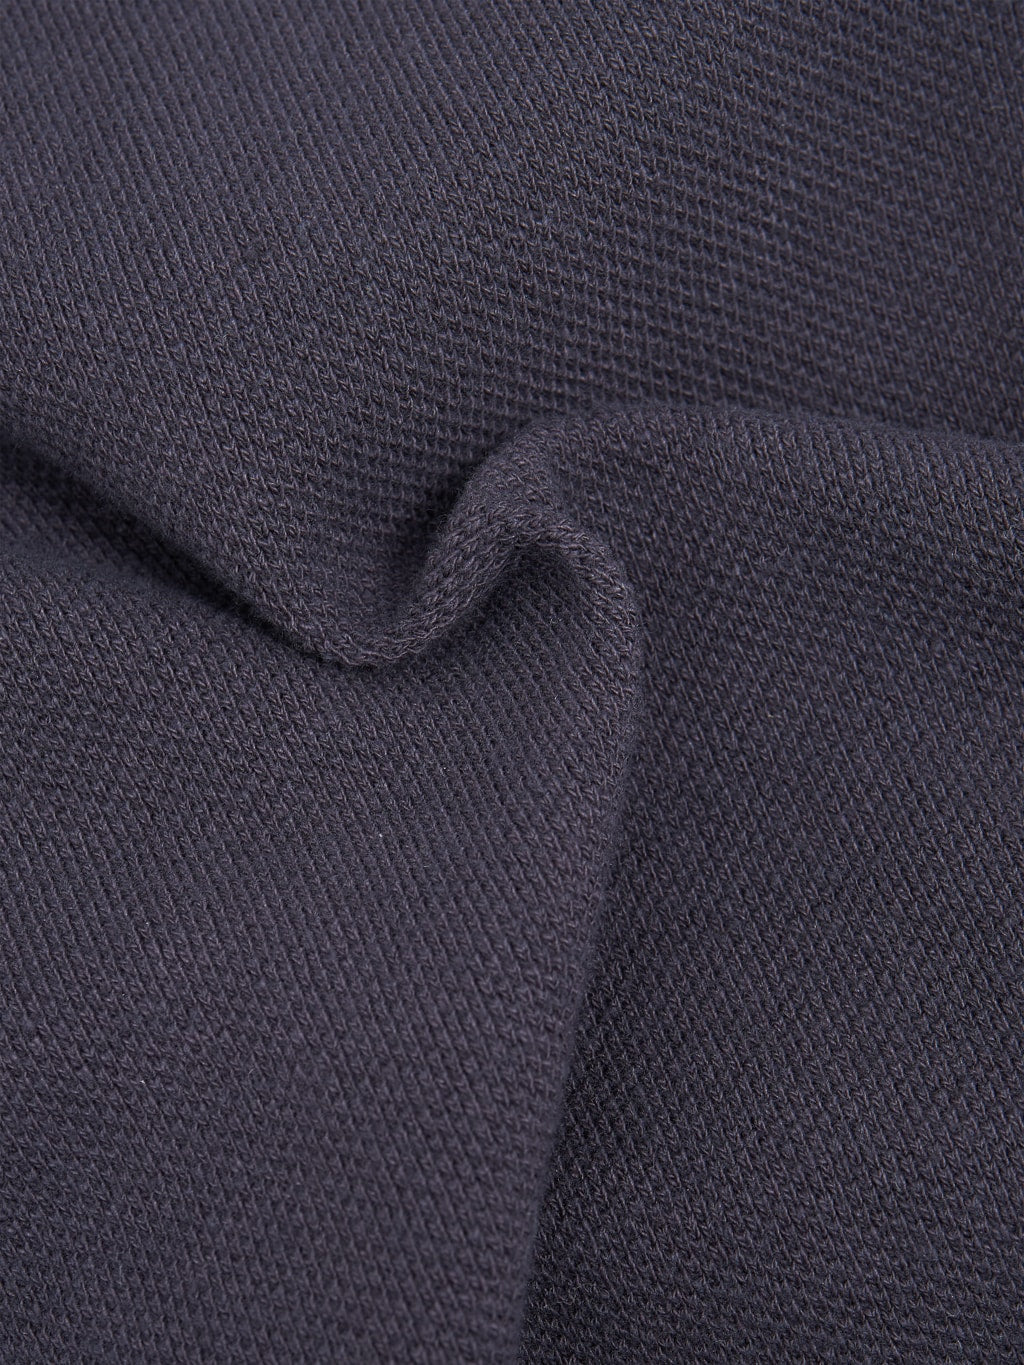 ues polo shirt navy cotton texture